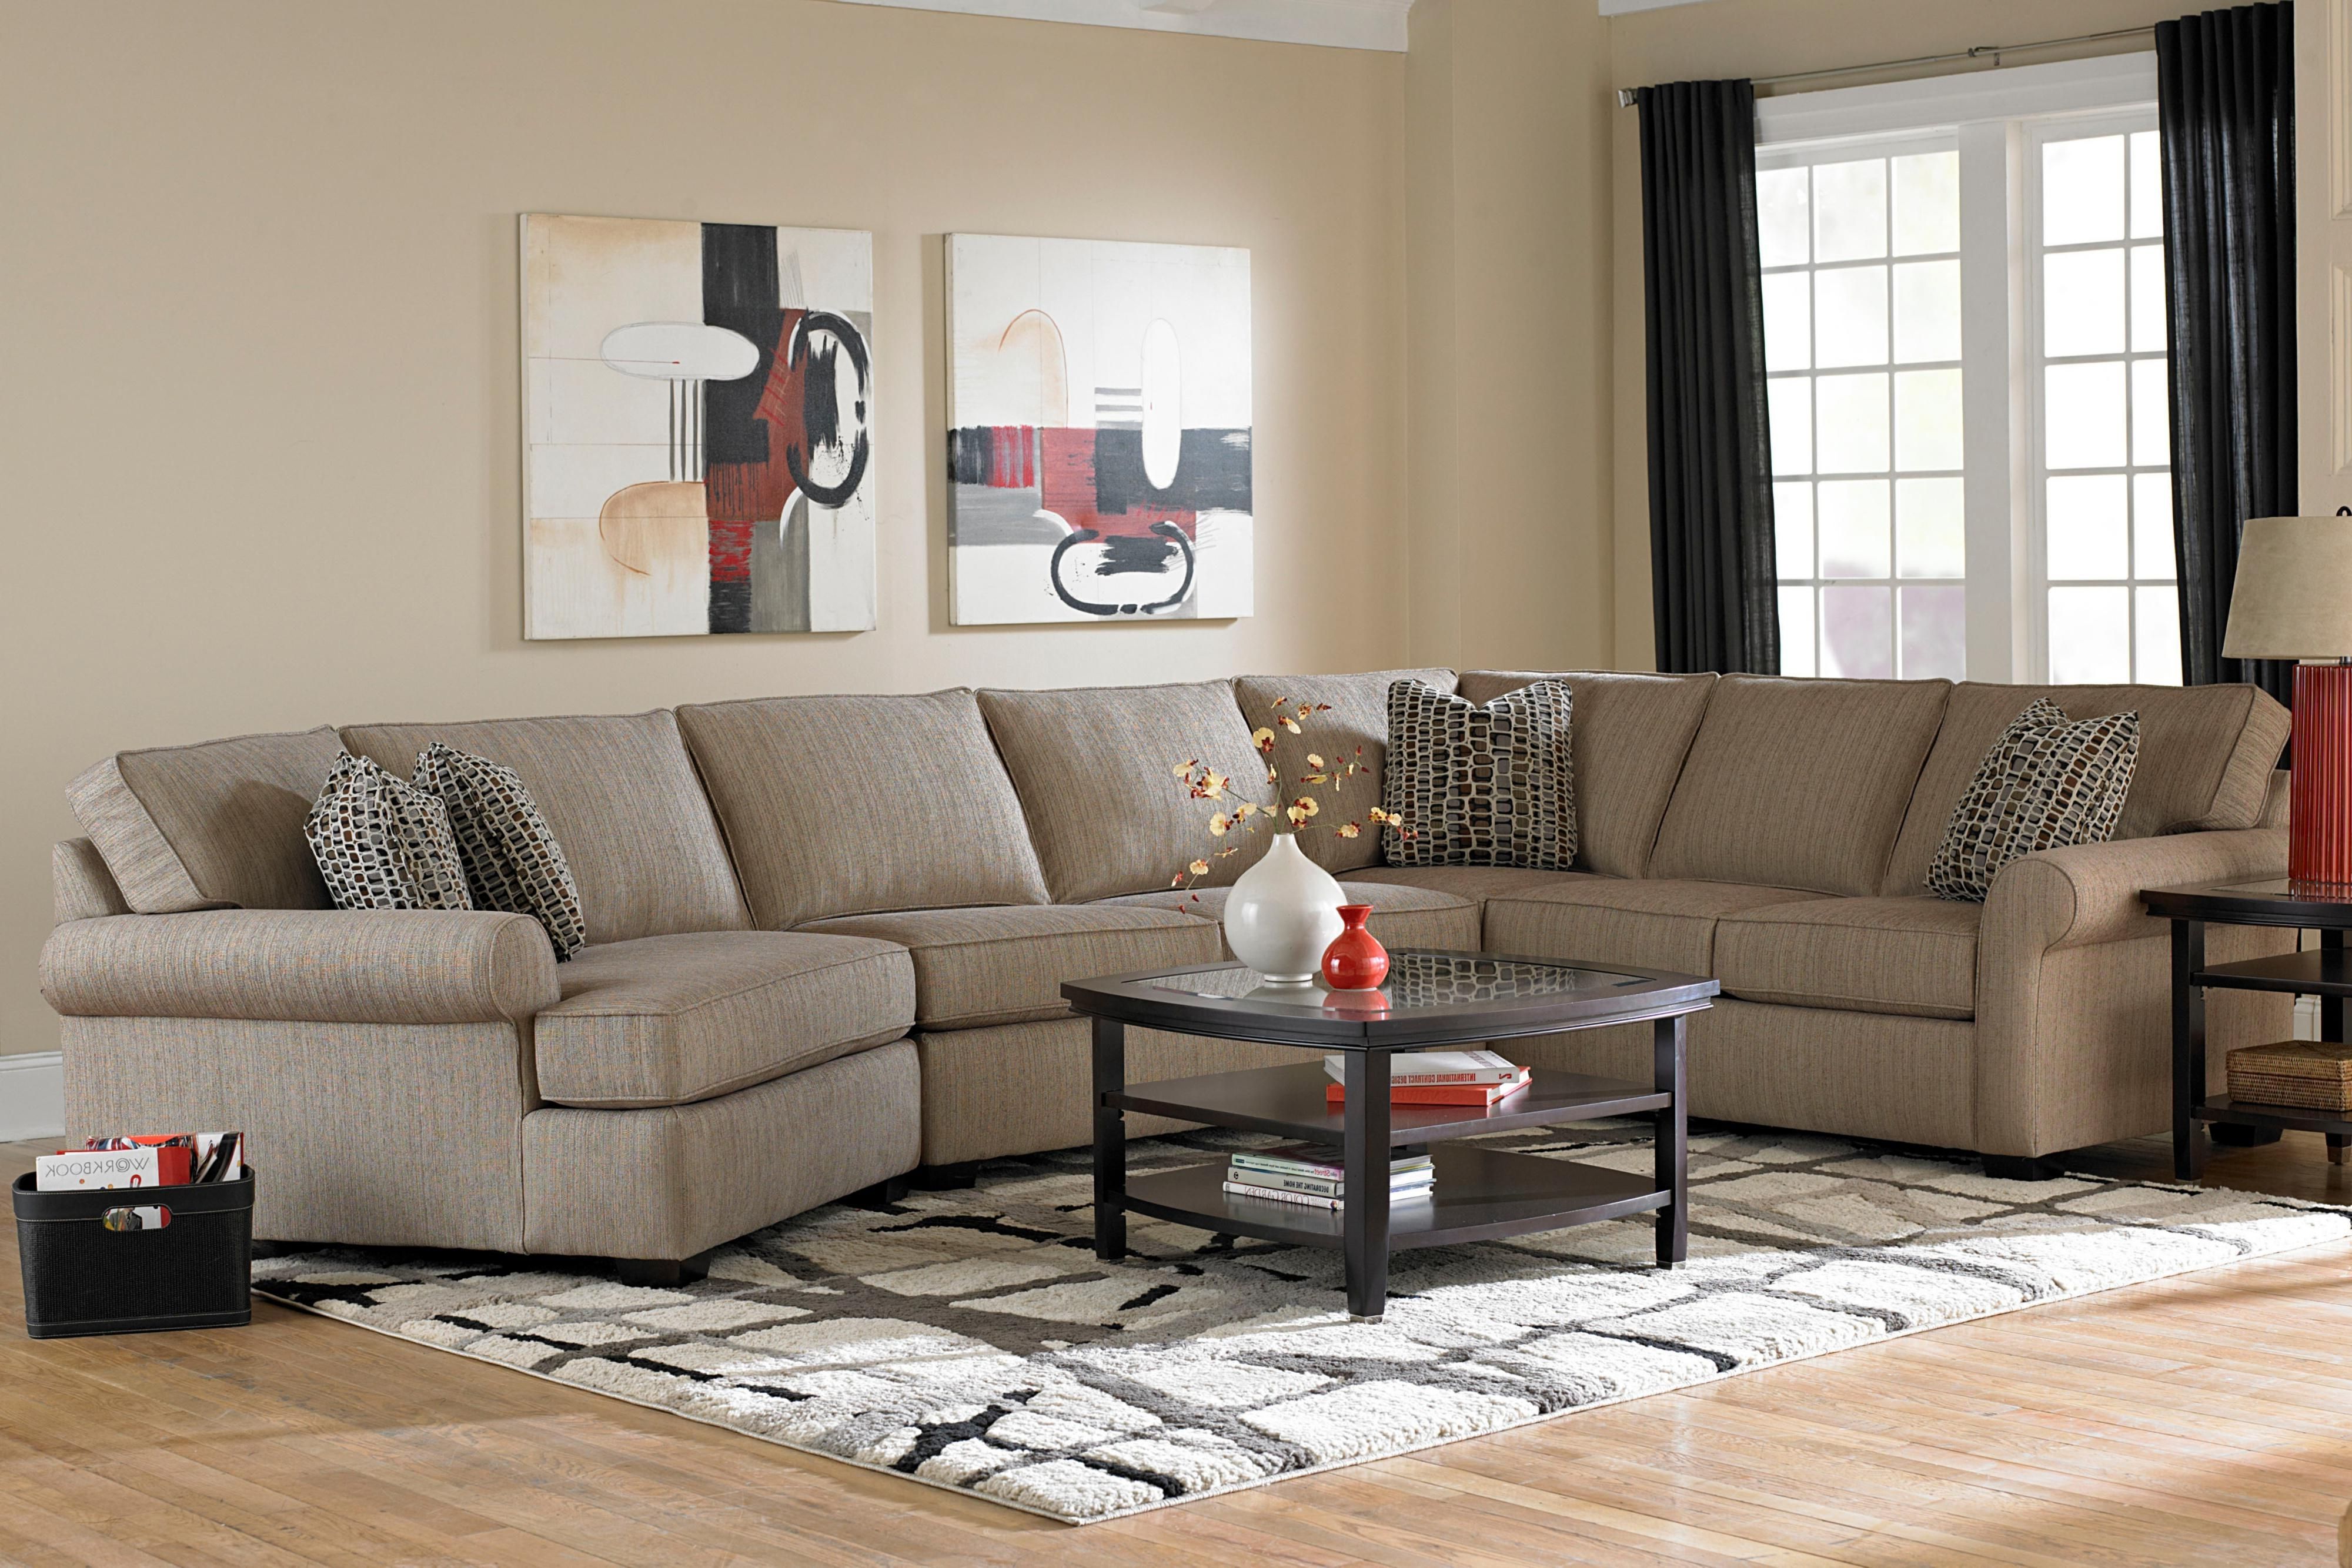 Jonesboro Ar Sectional Sofas Throughout Most Current Broyhill Furniture Ethan Transitional Sectional Sofa With Right (View 16 of 20)